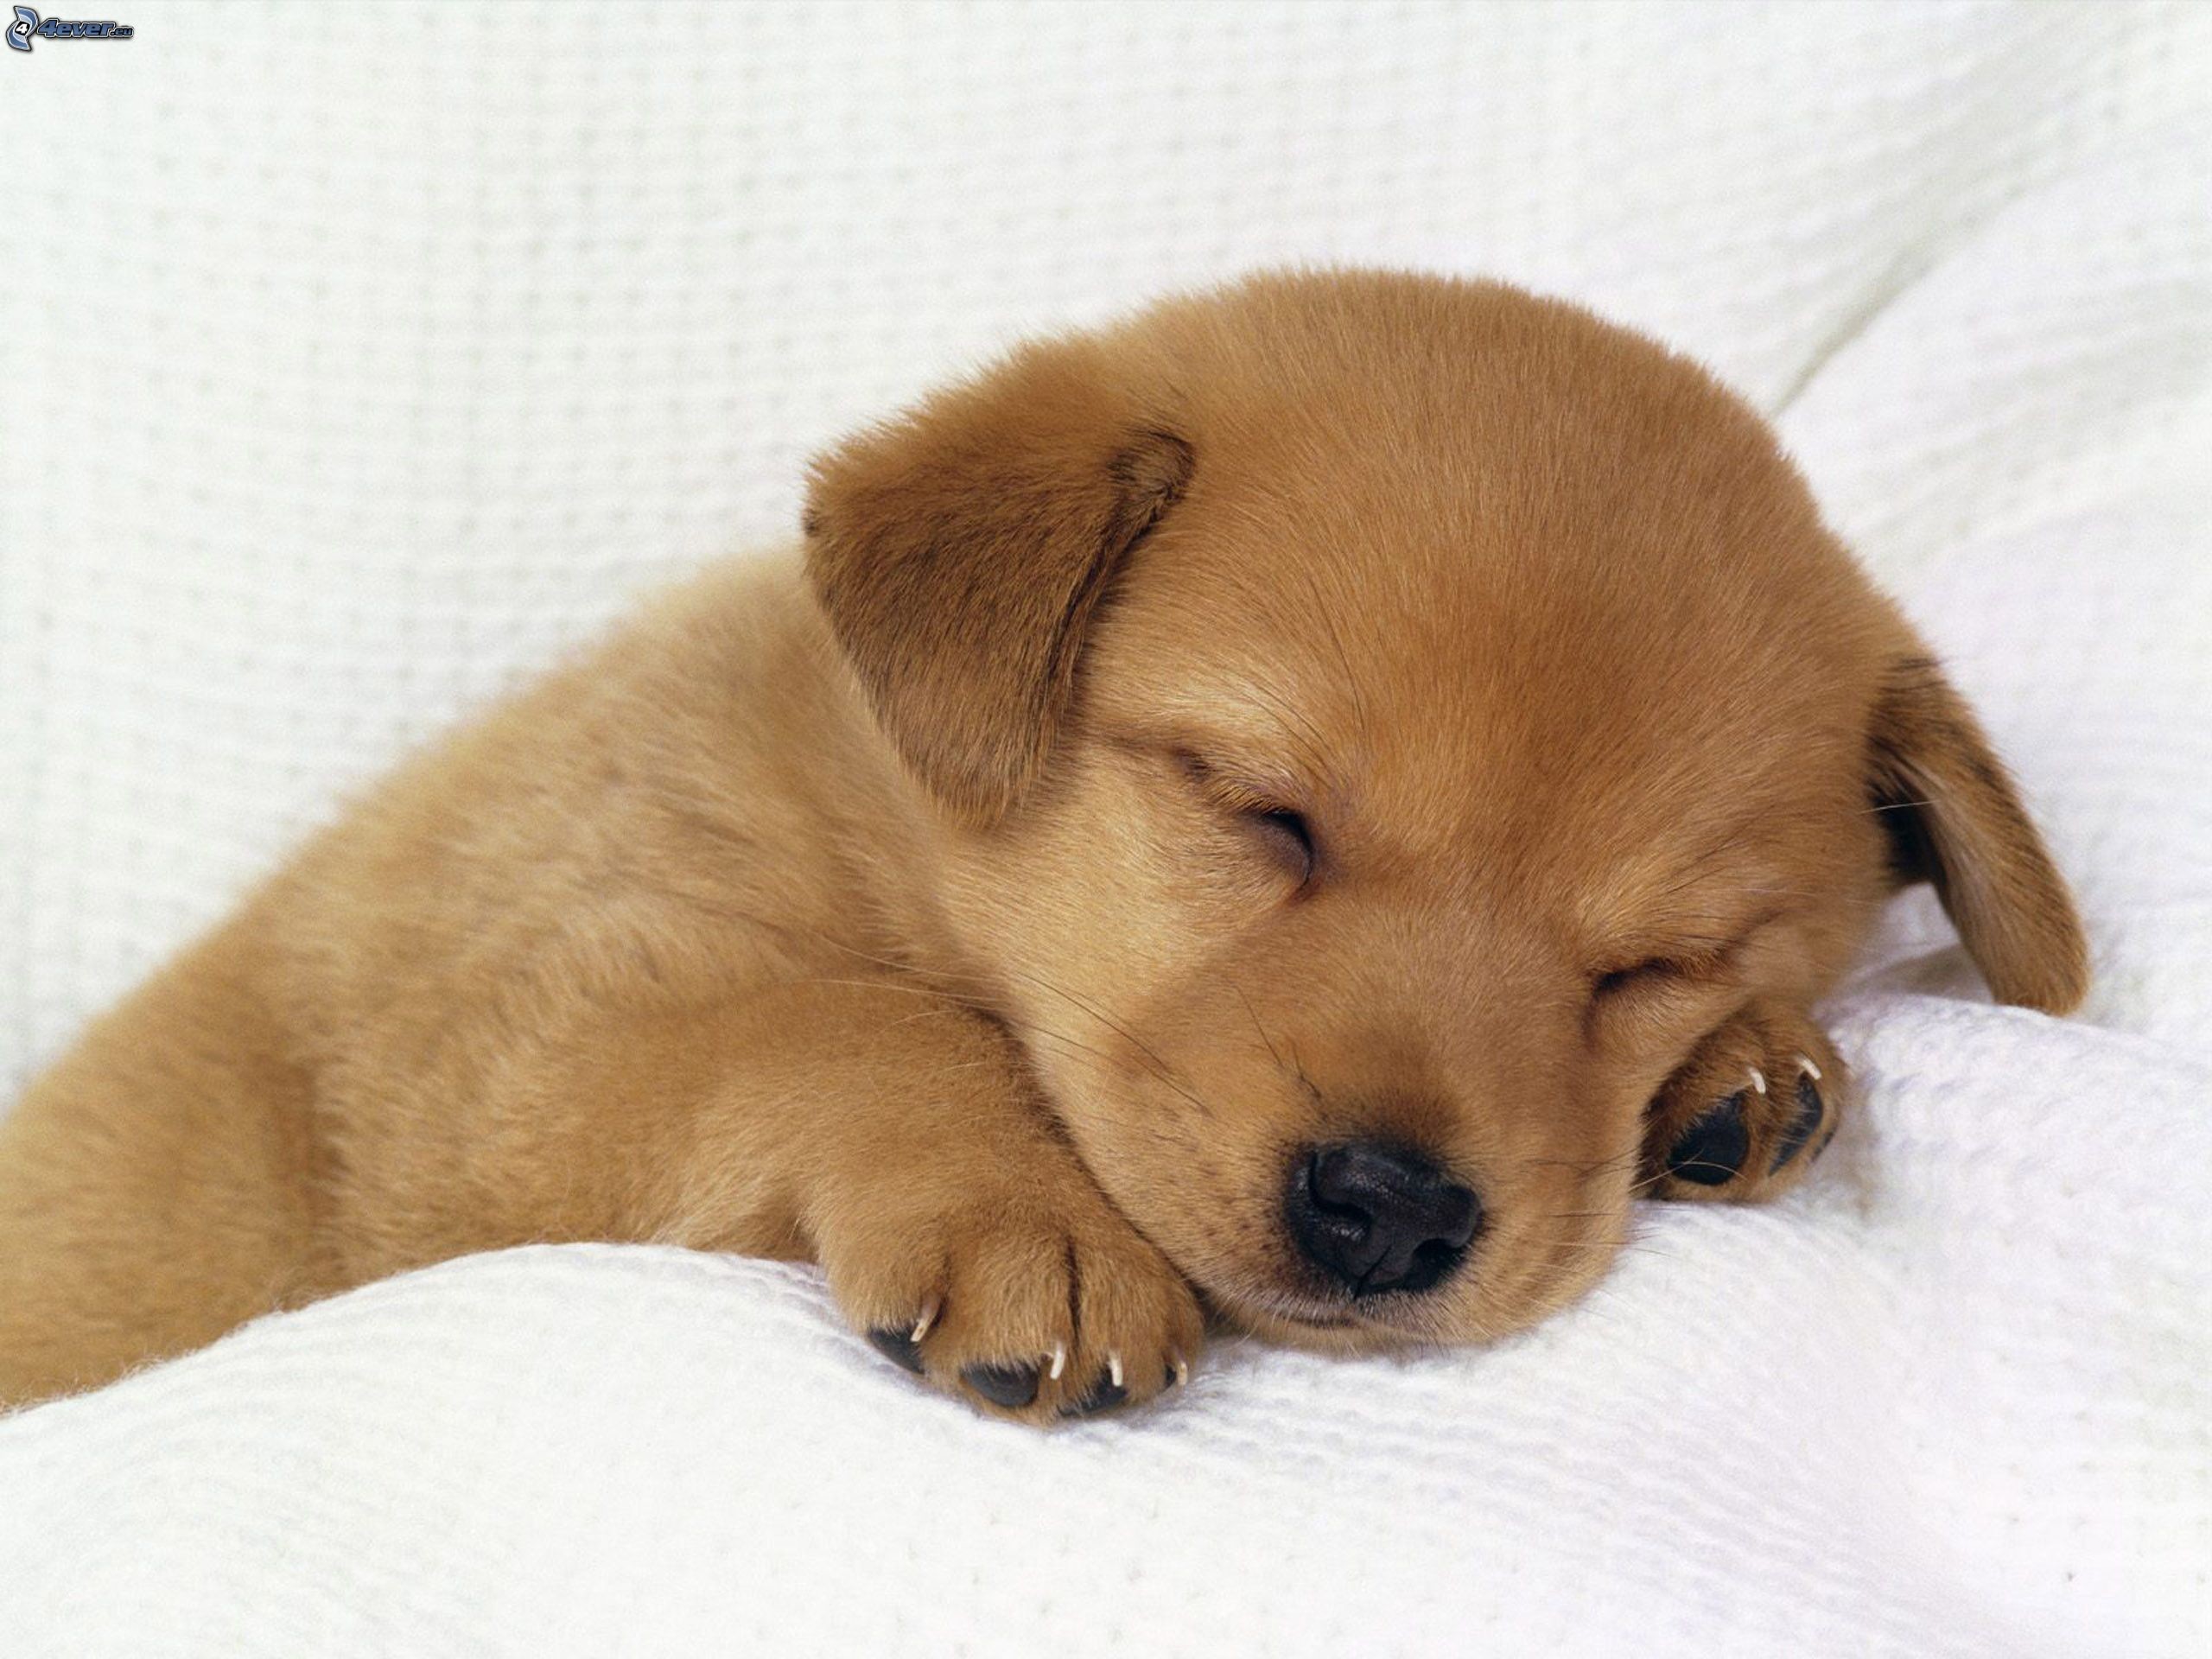 2560x1920 Sleeping Puppy Wallpaper Dogs Animals (5 Wallpapers)